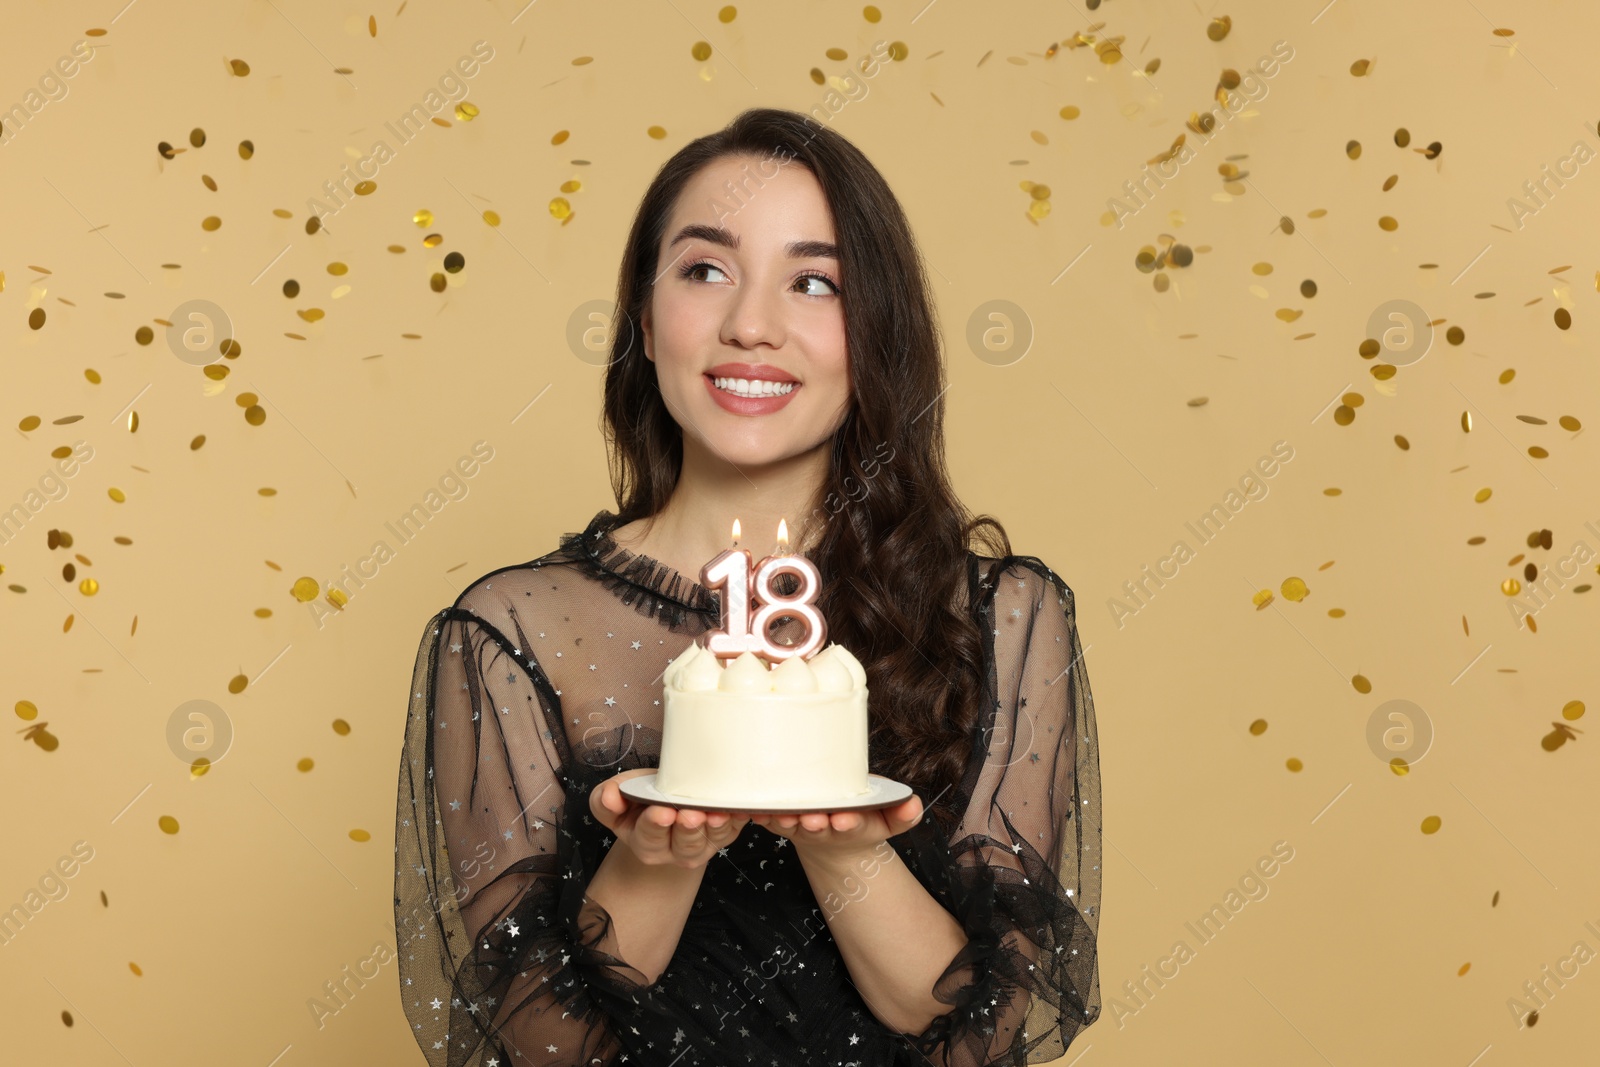 Photo of Coming of age party - 18th birthday. Woman holding delicious cake with number shaped candles and looking at falling confetti against beige background